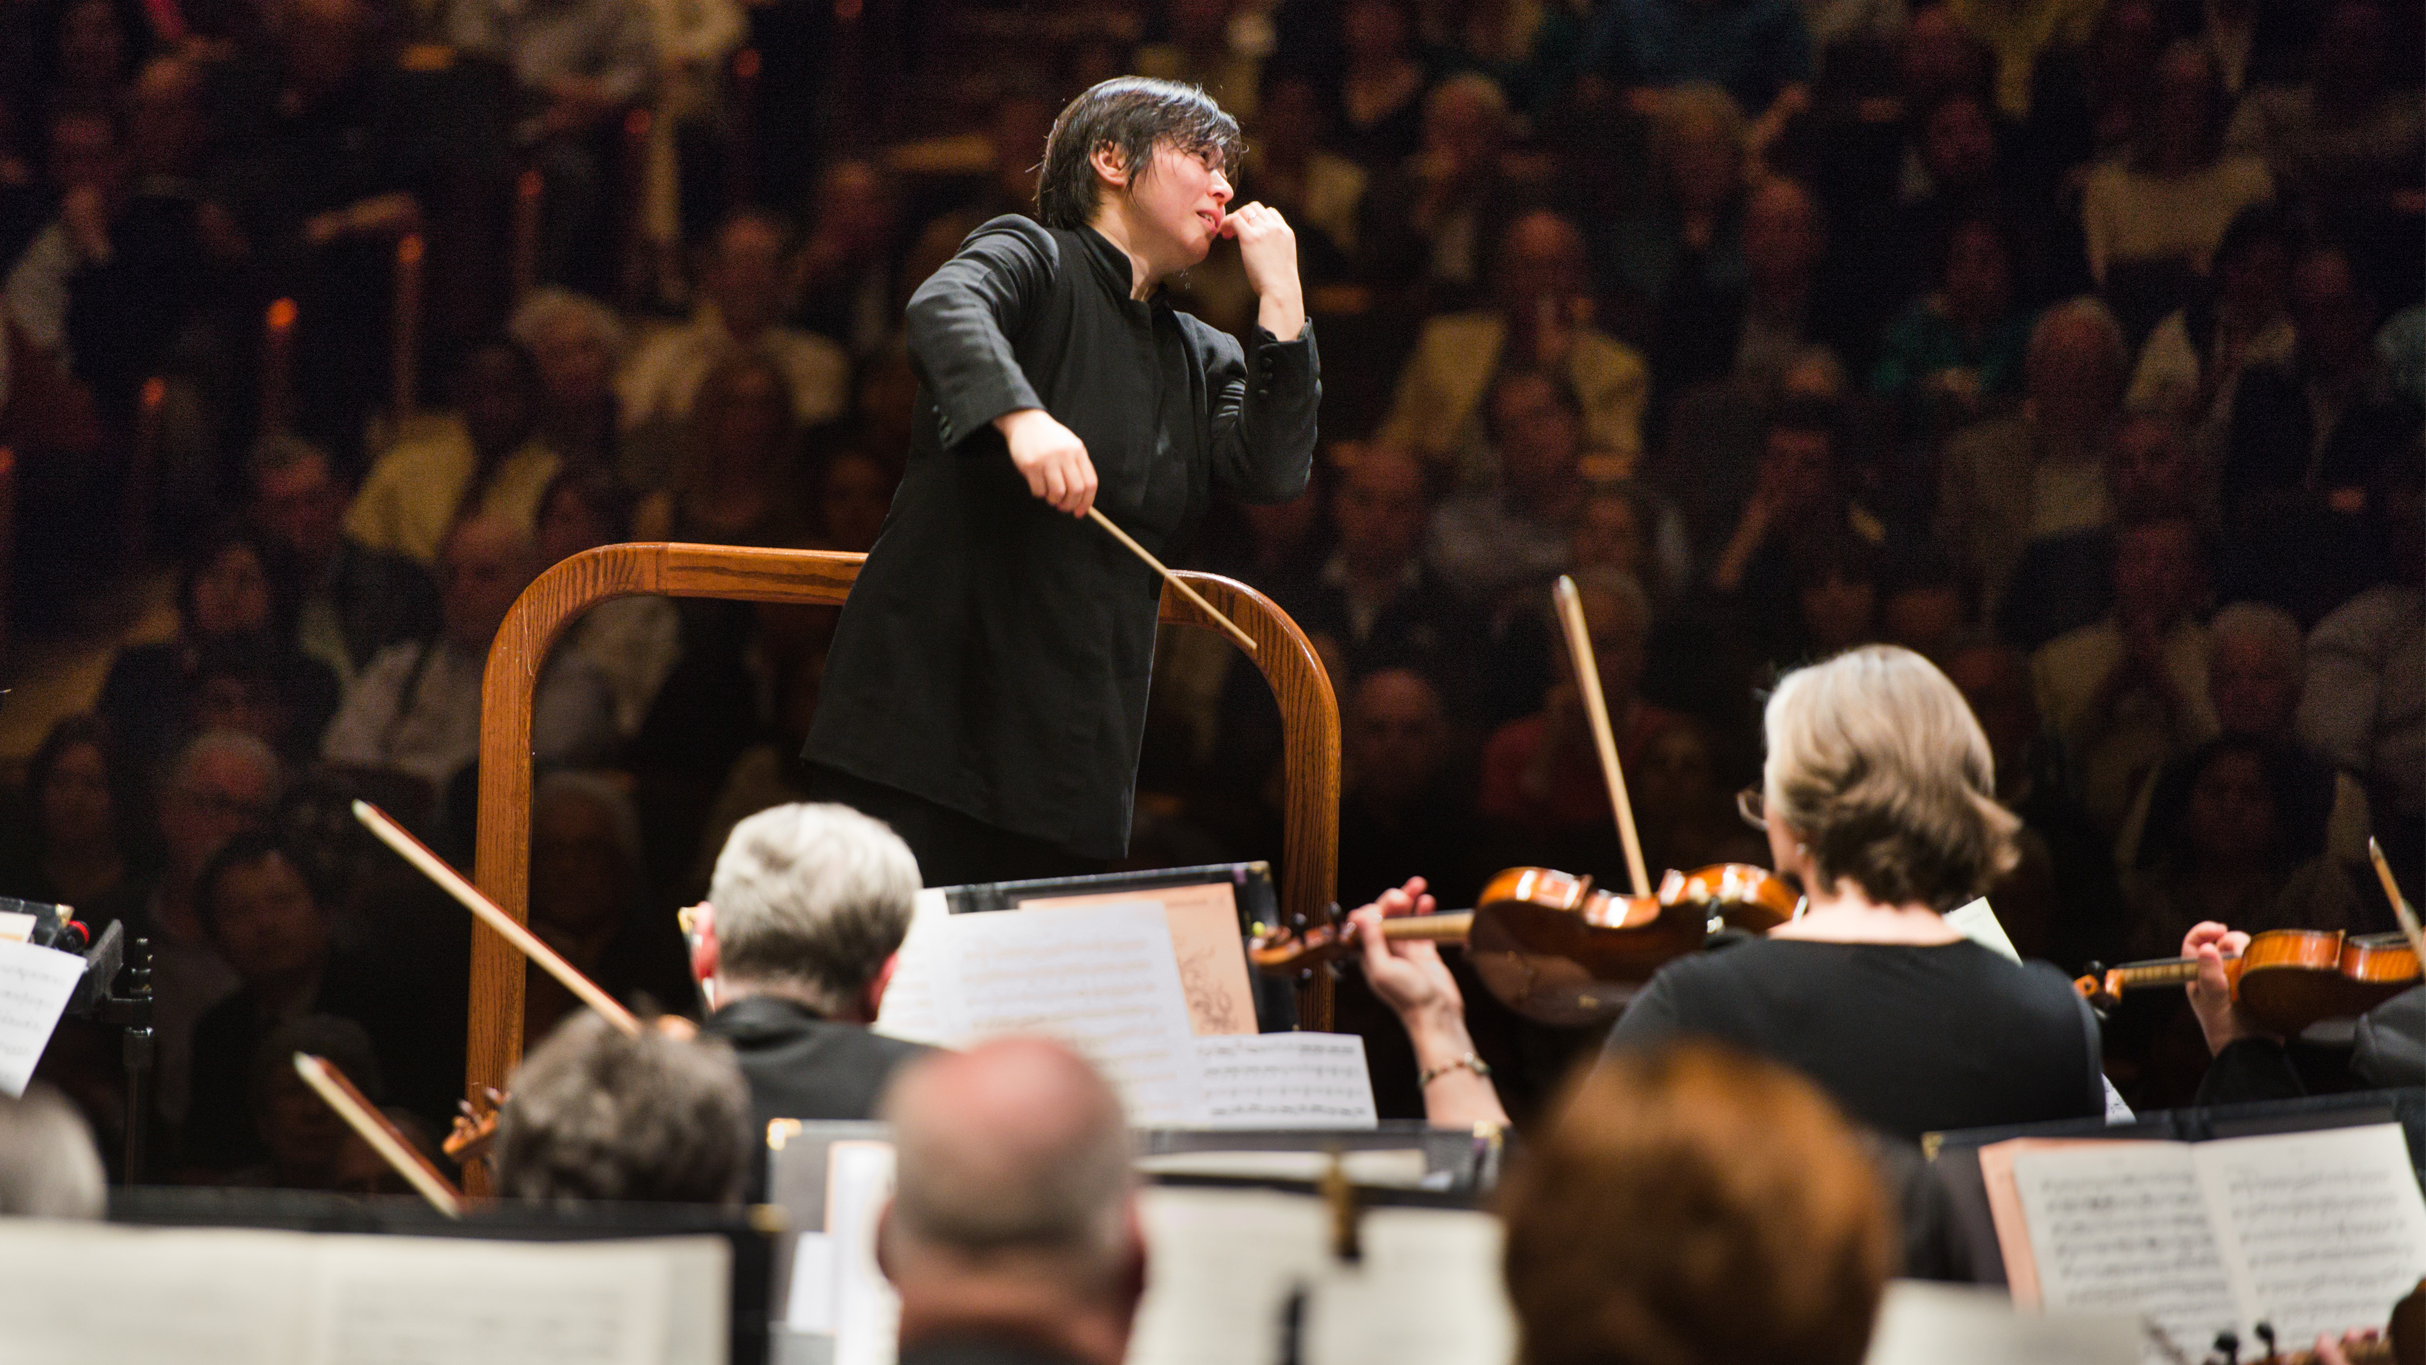 NJ Symphony: Star Wars: The Force Awakens In Concert